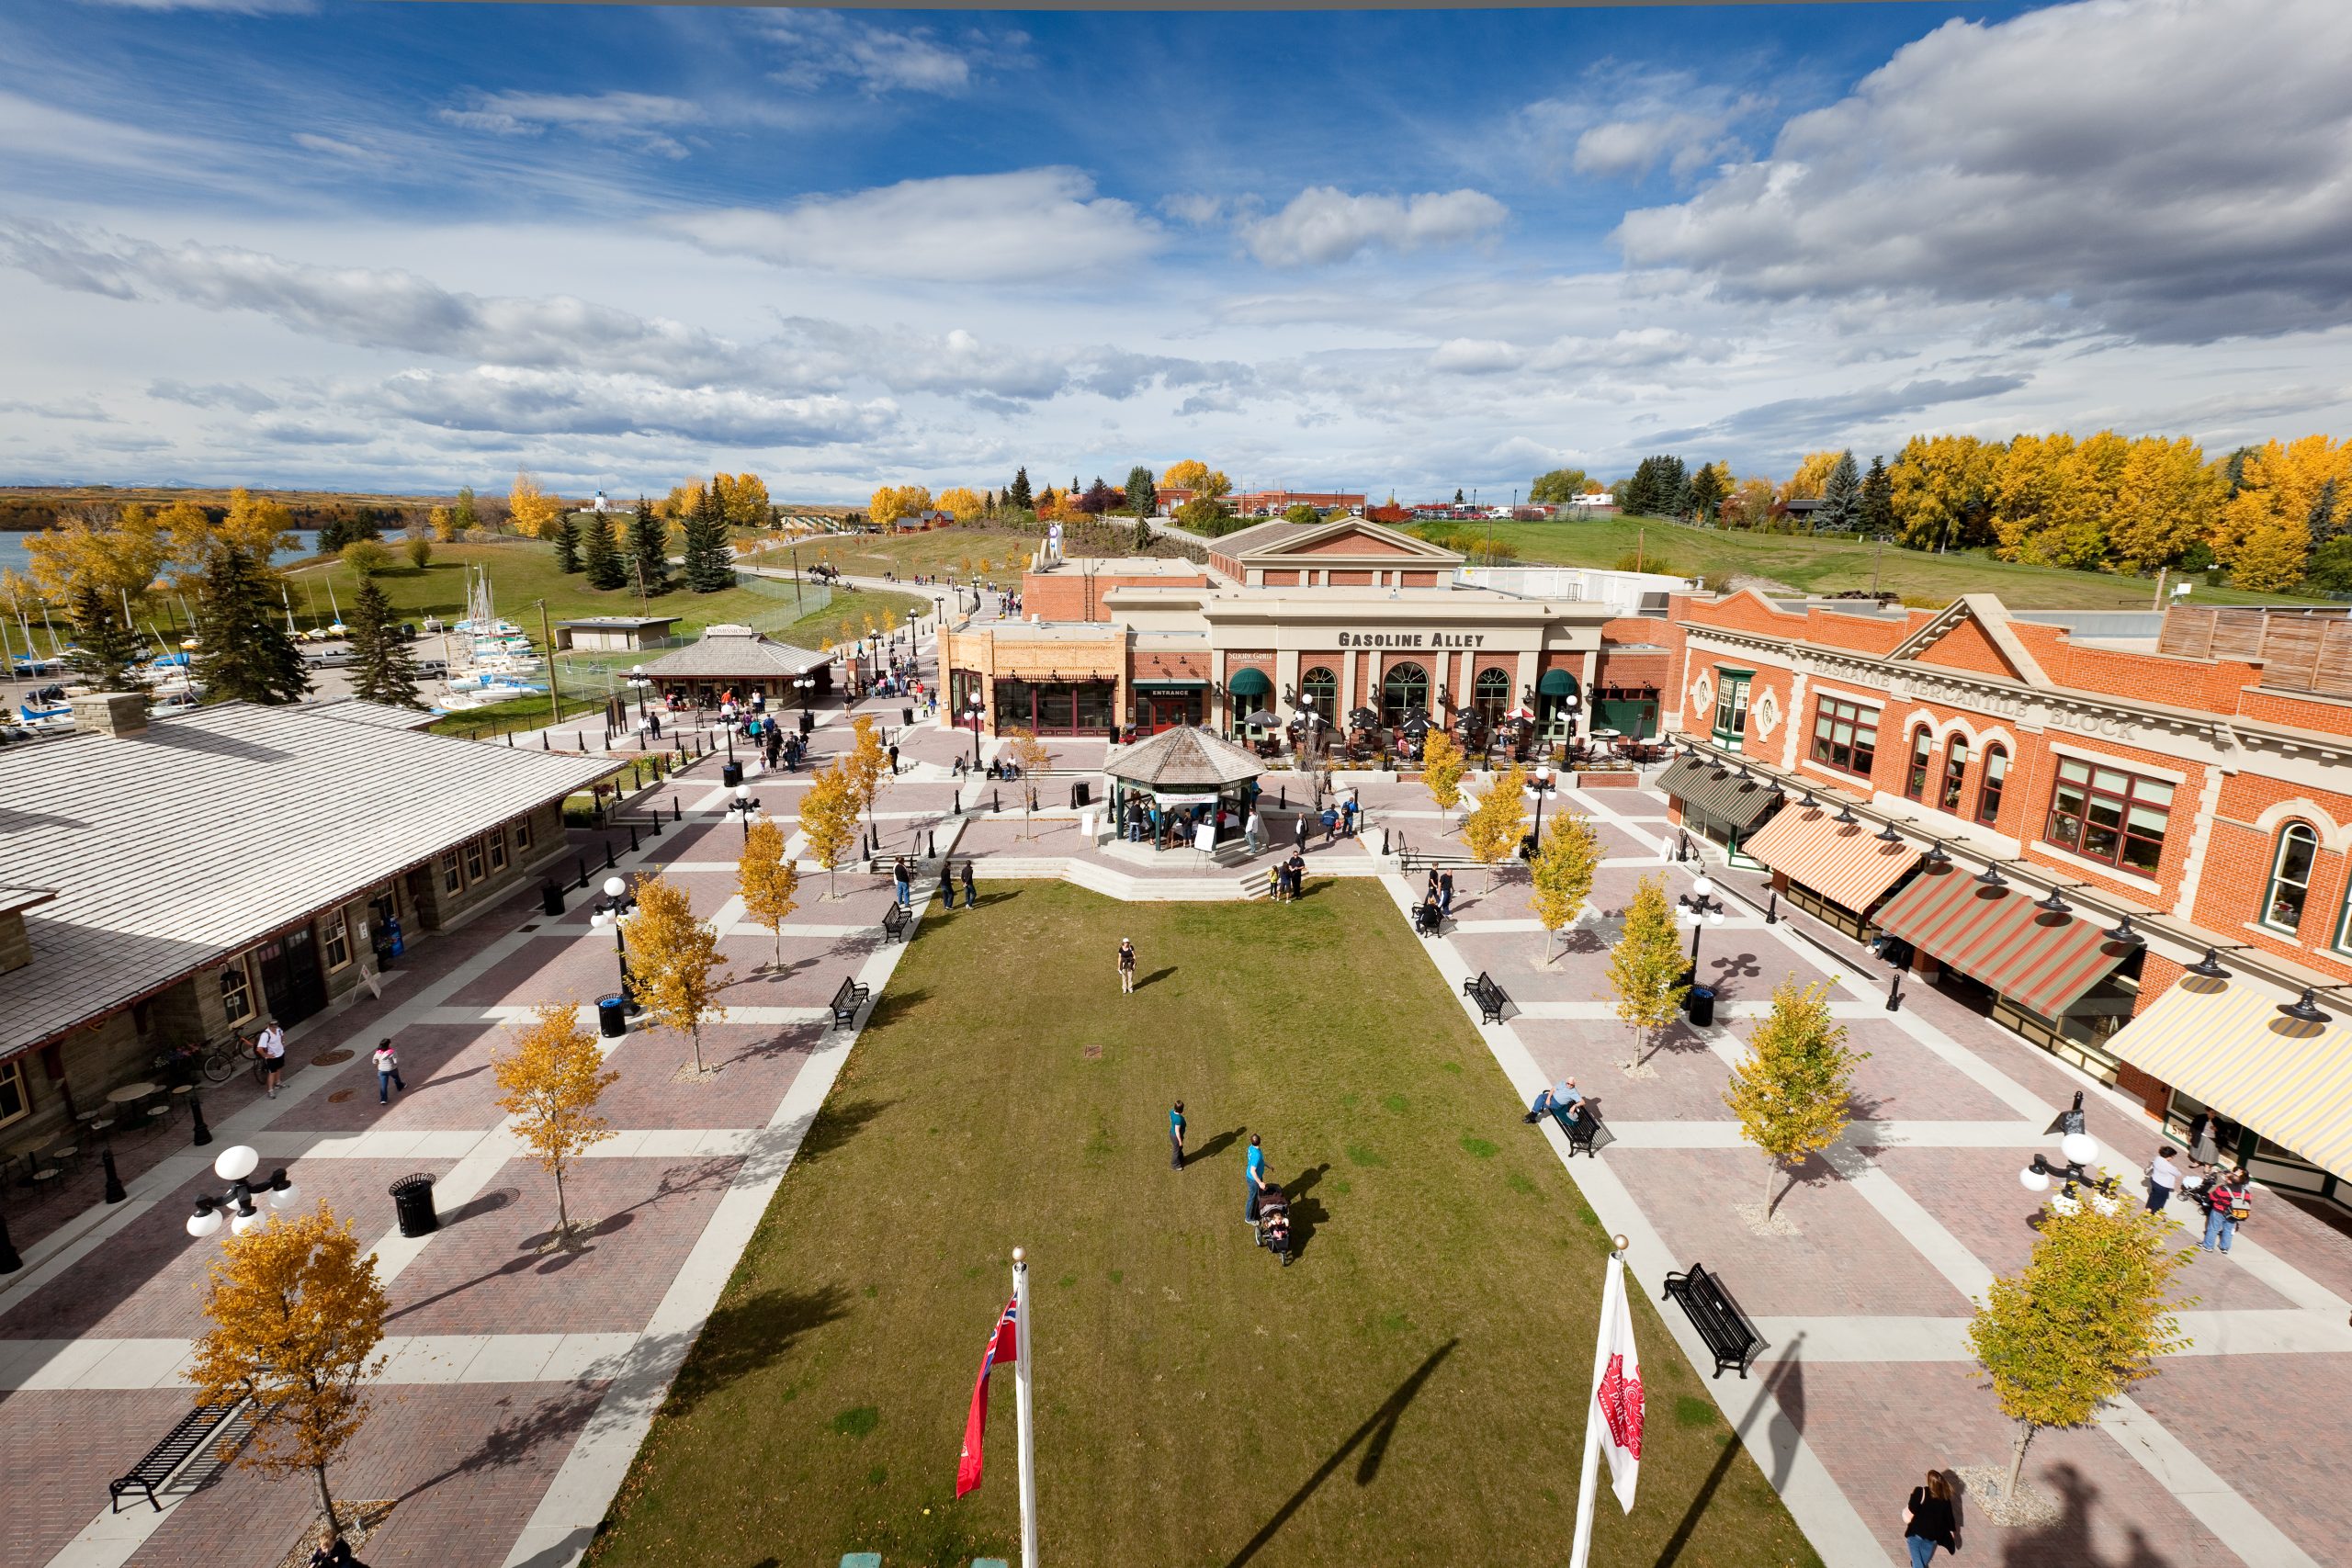 An aerial shot of the Engineered Air Plaza at Heritage Park, located in Heritage Towne Square